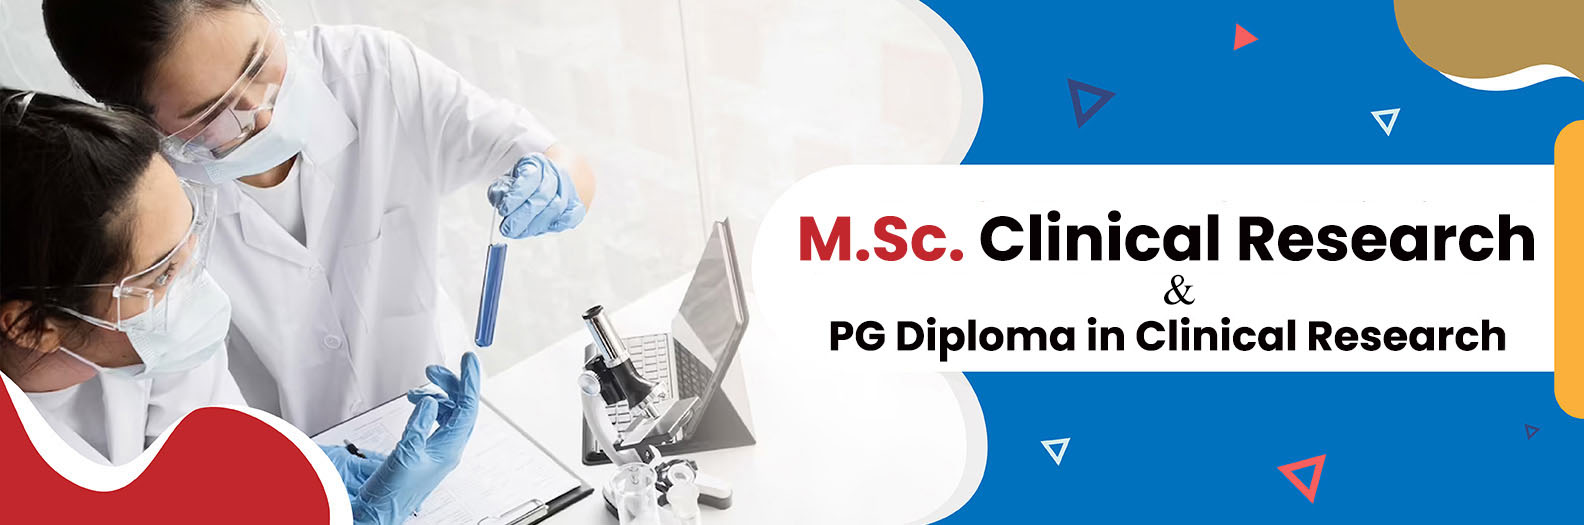 Pg Diploma in Clinical Research